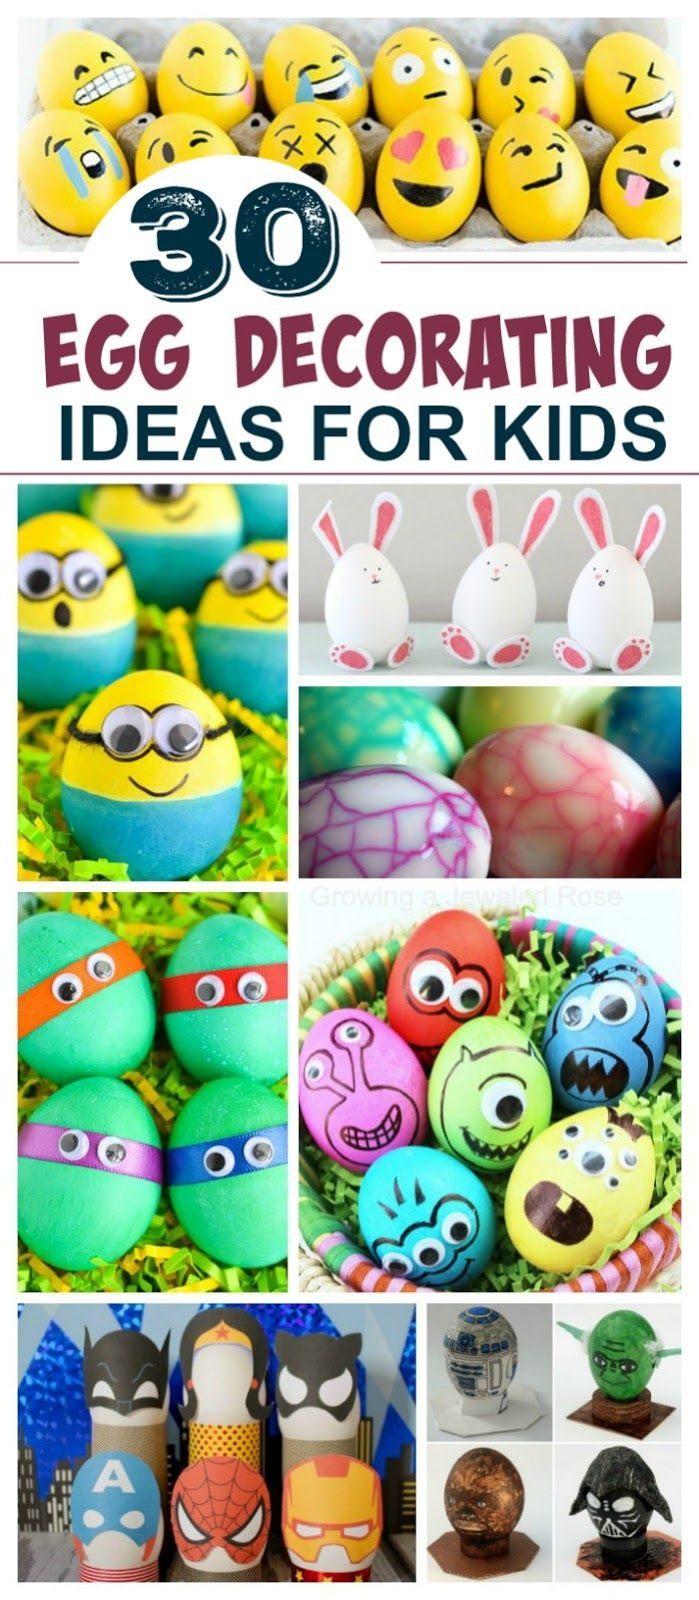 Easter Egg Dying Party Ideas
 Egg Decorating Ideas